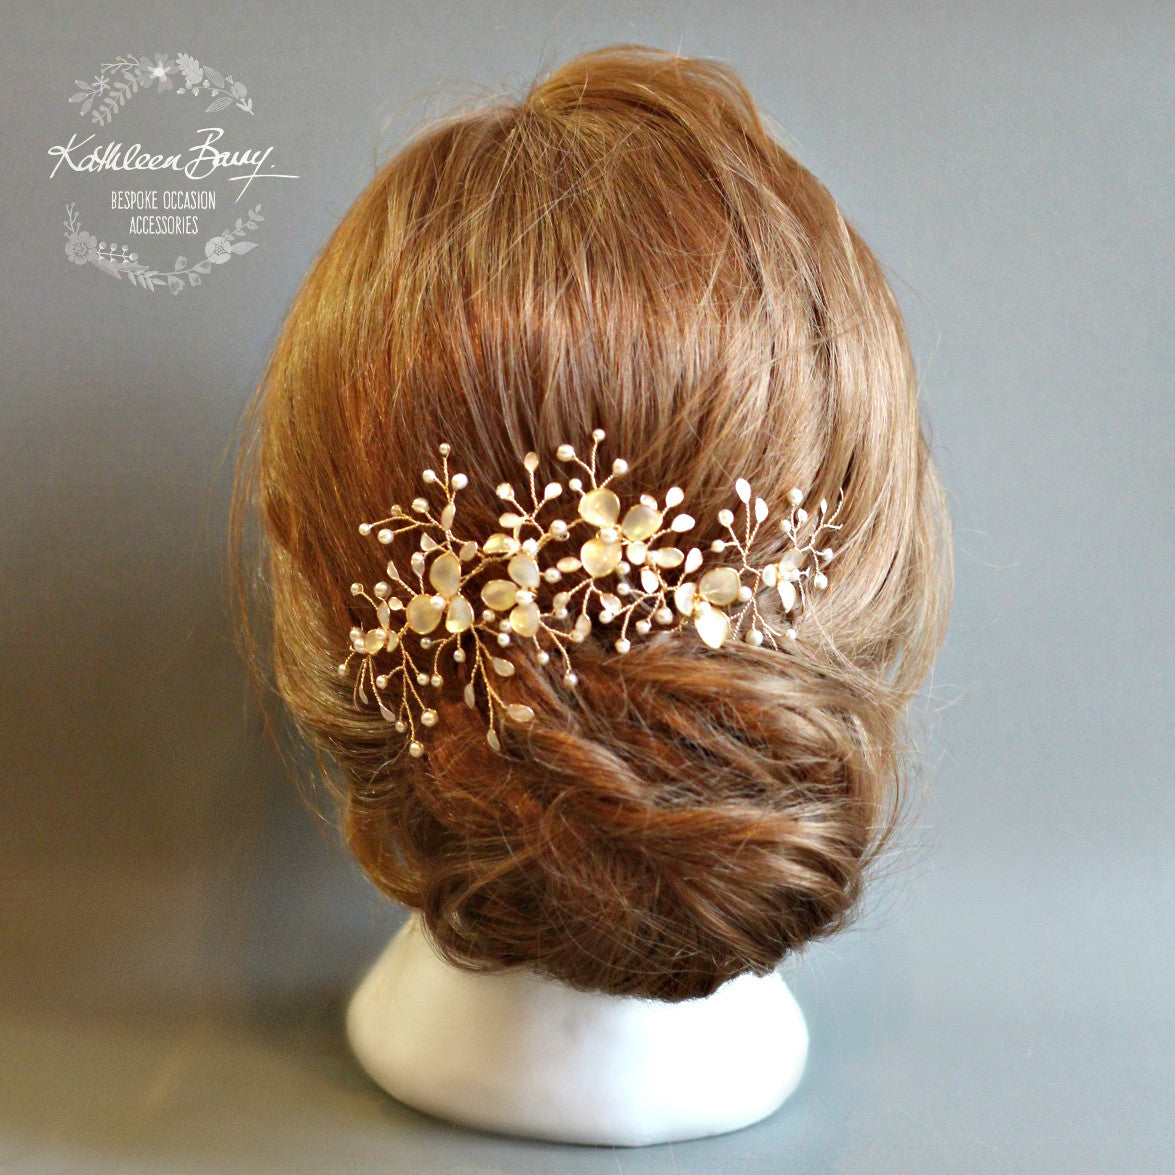 Madelene floral wedding hairpiece, semi opaque flower and leaf detailing, with crystals and seed pearls - Assorted colors available : Gold, silver and rose gold